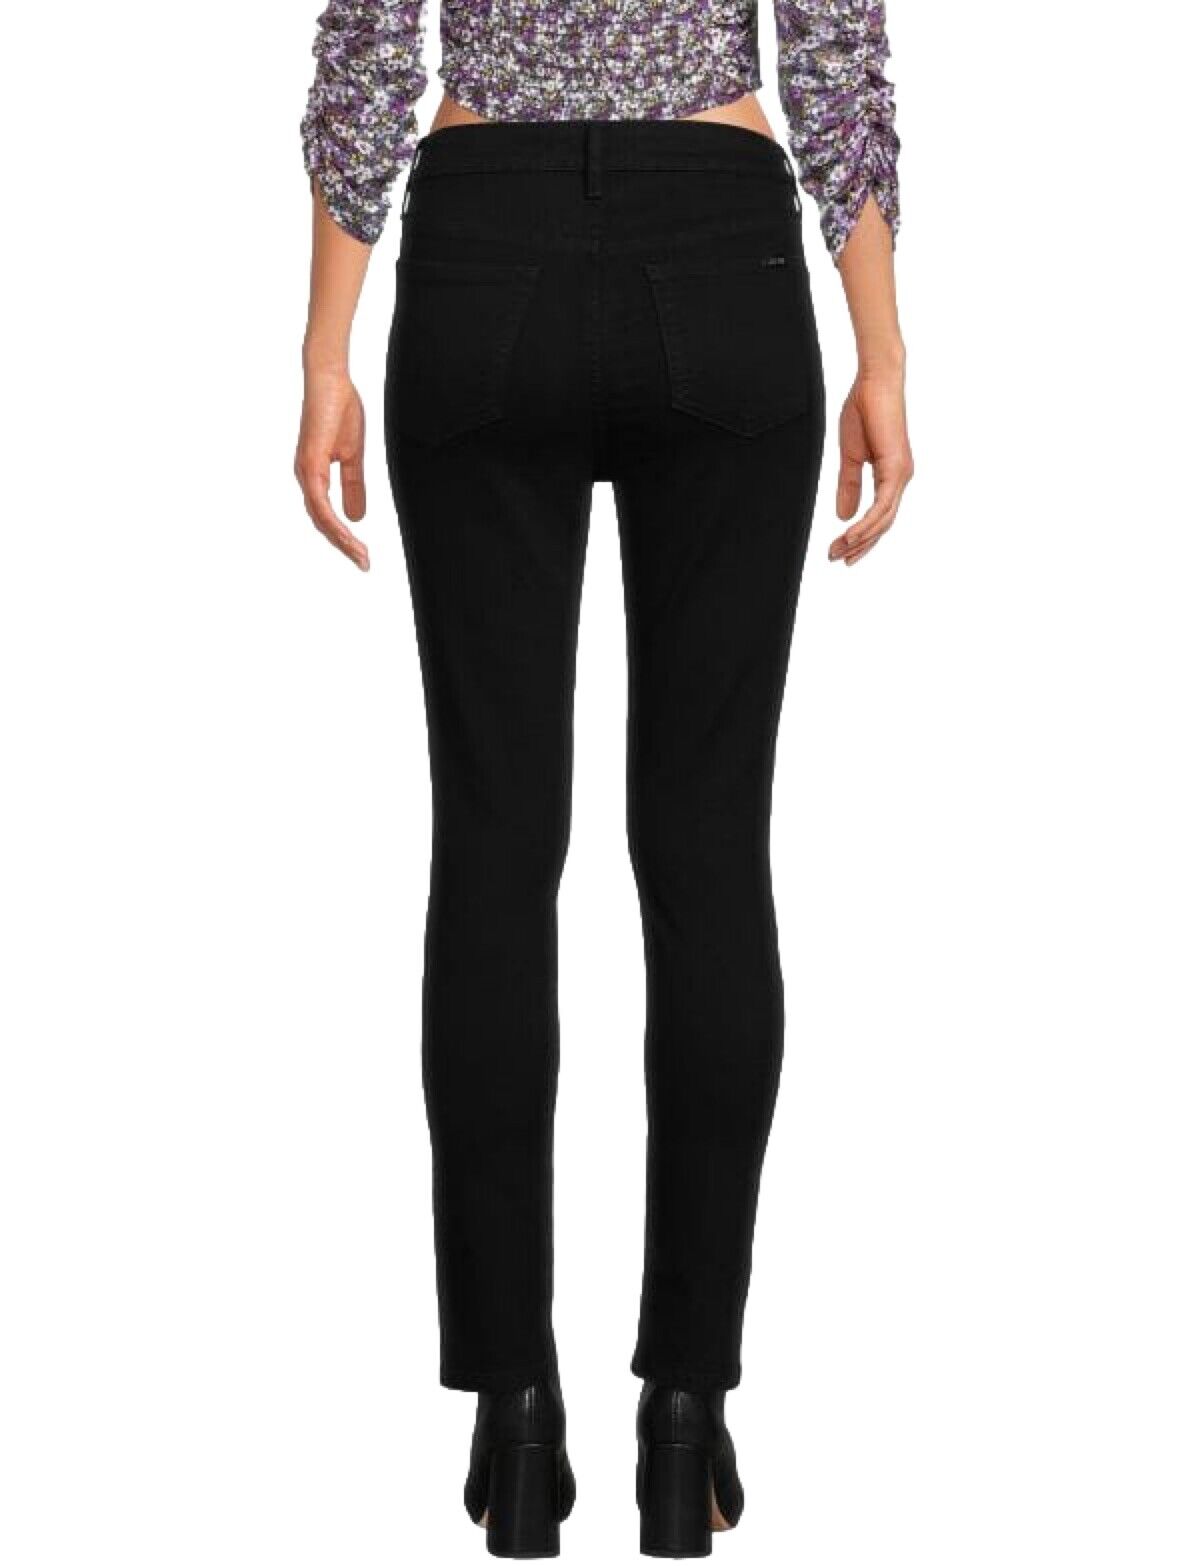 JOE'S JEANS "THE ICON MID-RISE SKINNY ANKLE" Cord… - image 2